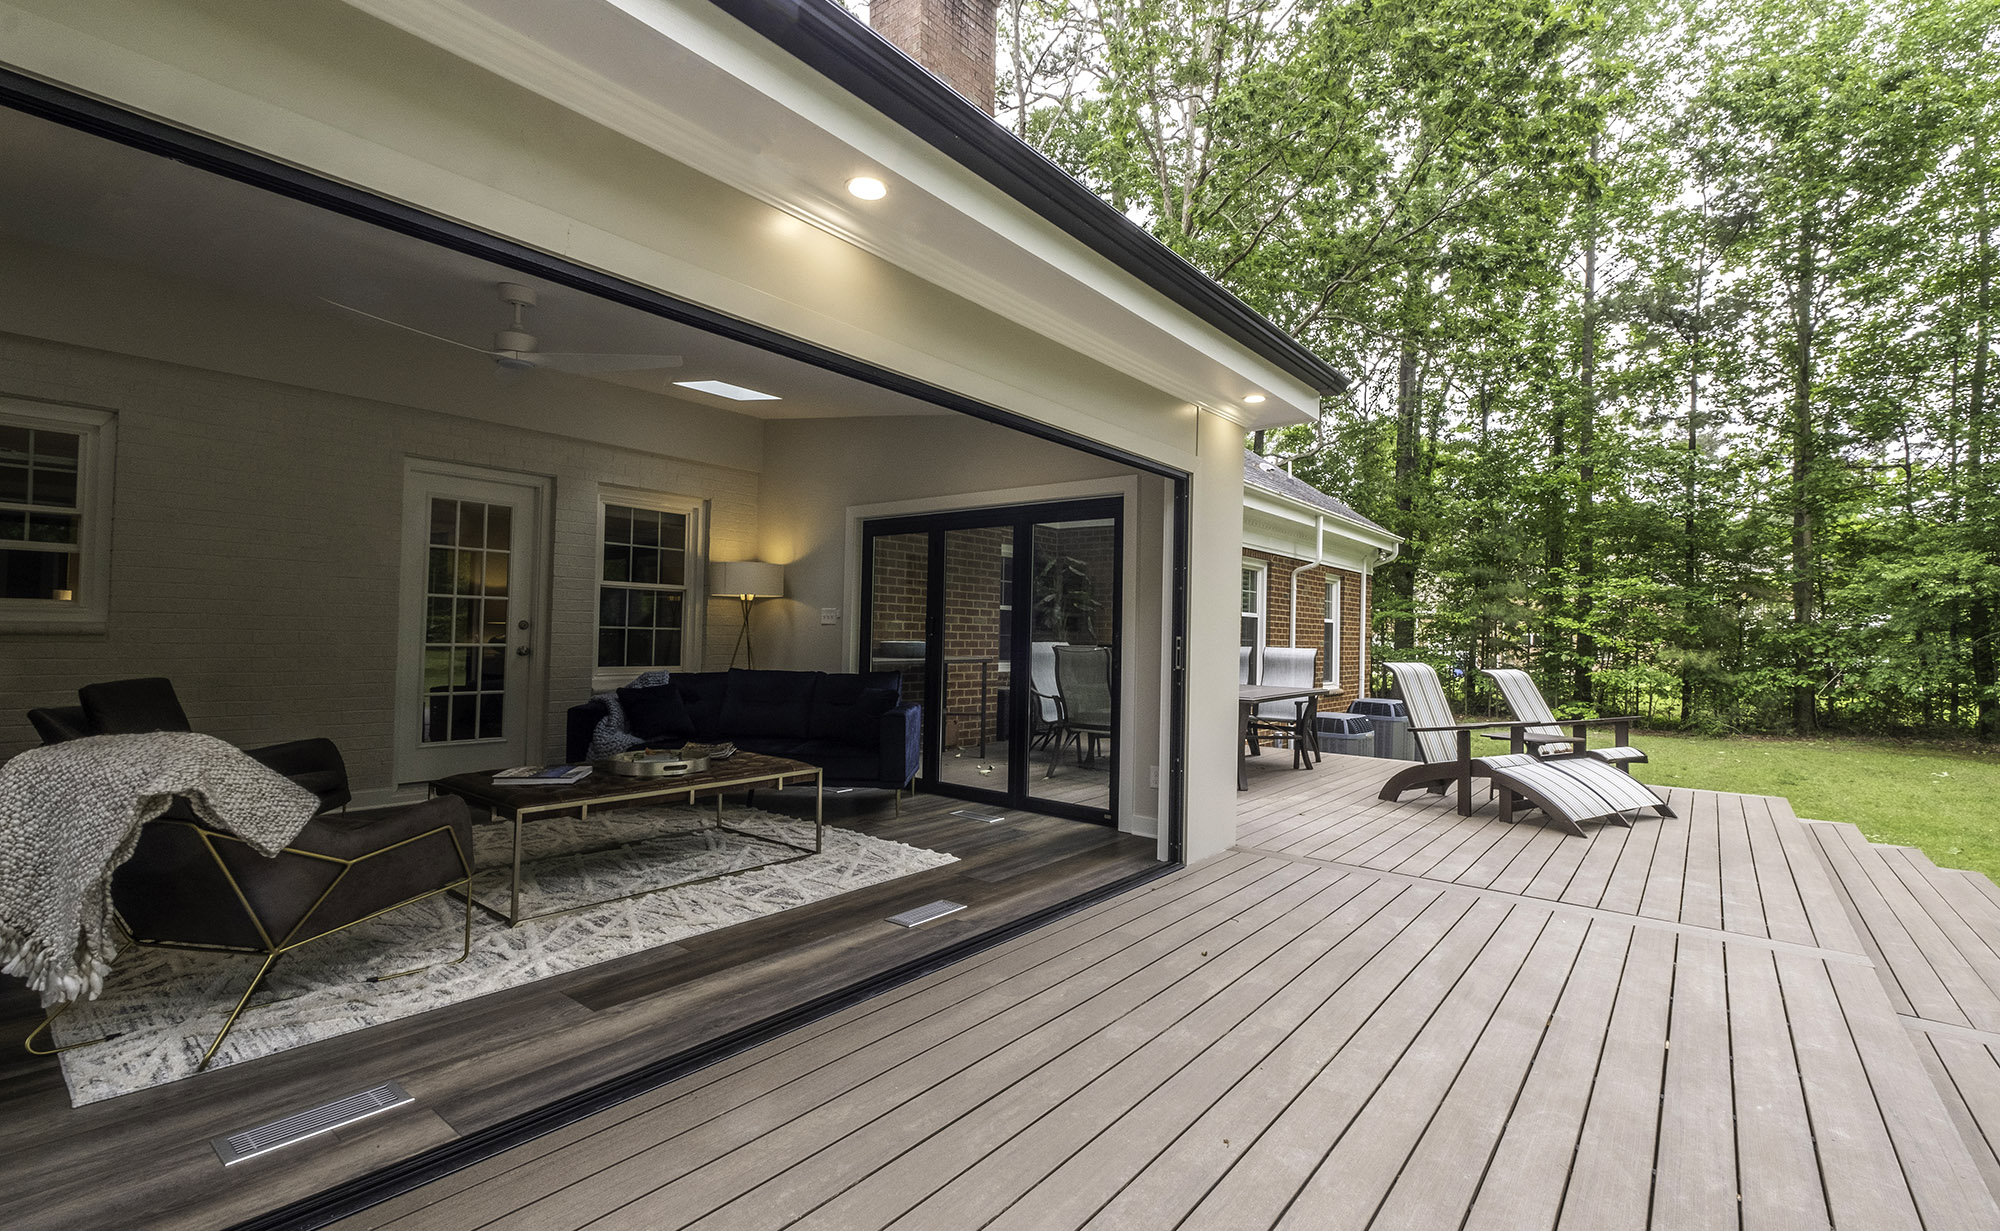 Sunroom Addition and composite deck